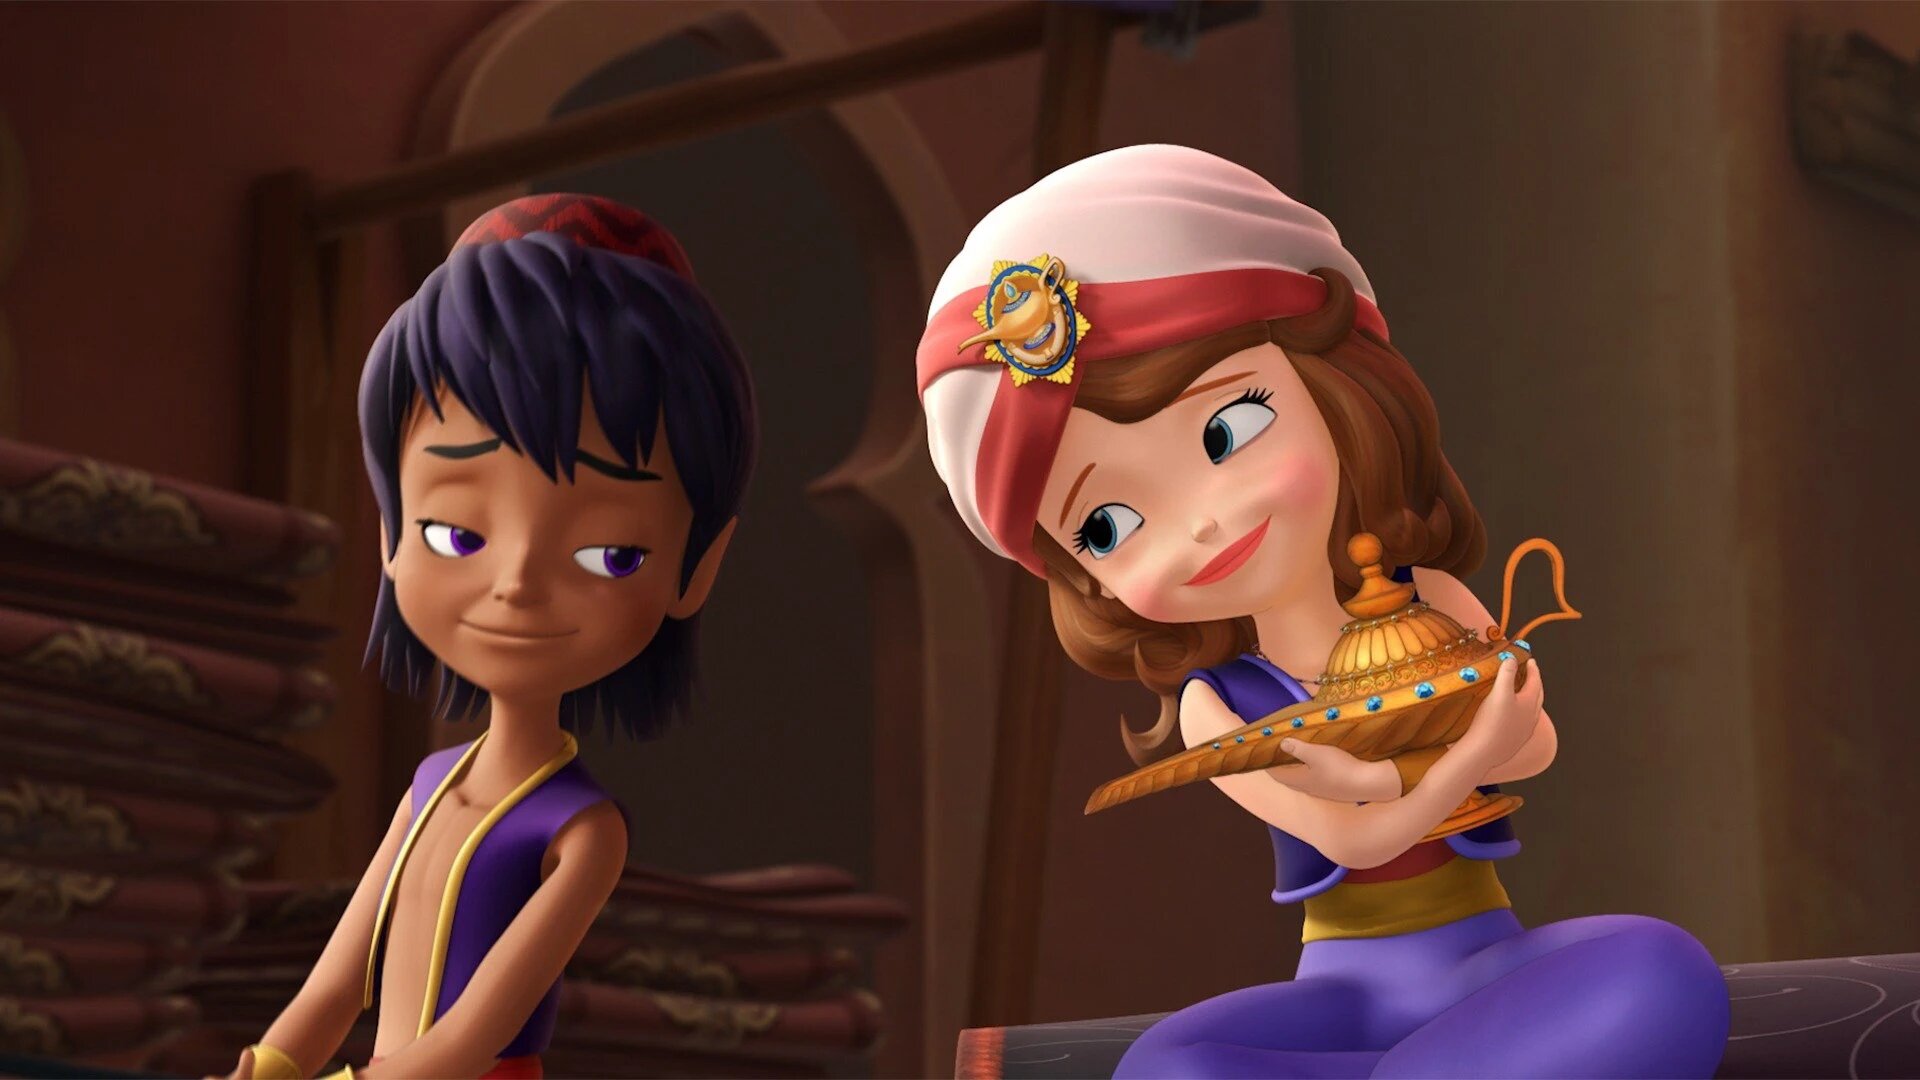 Sofia the First S3E7 New Genie on the Block